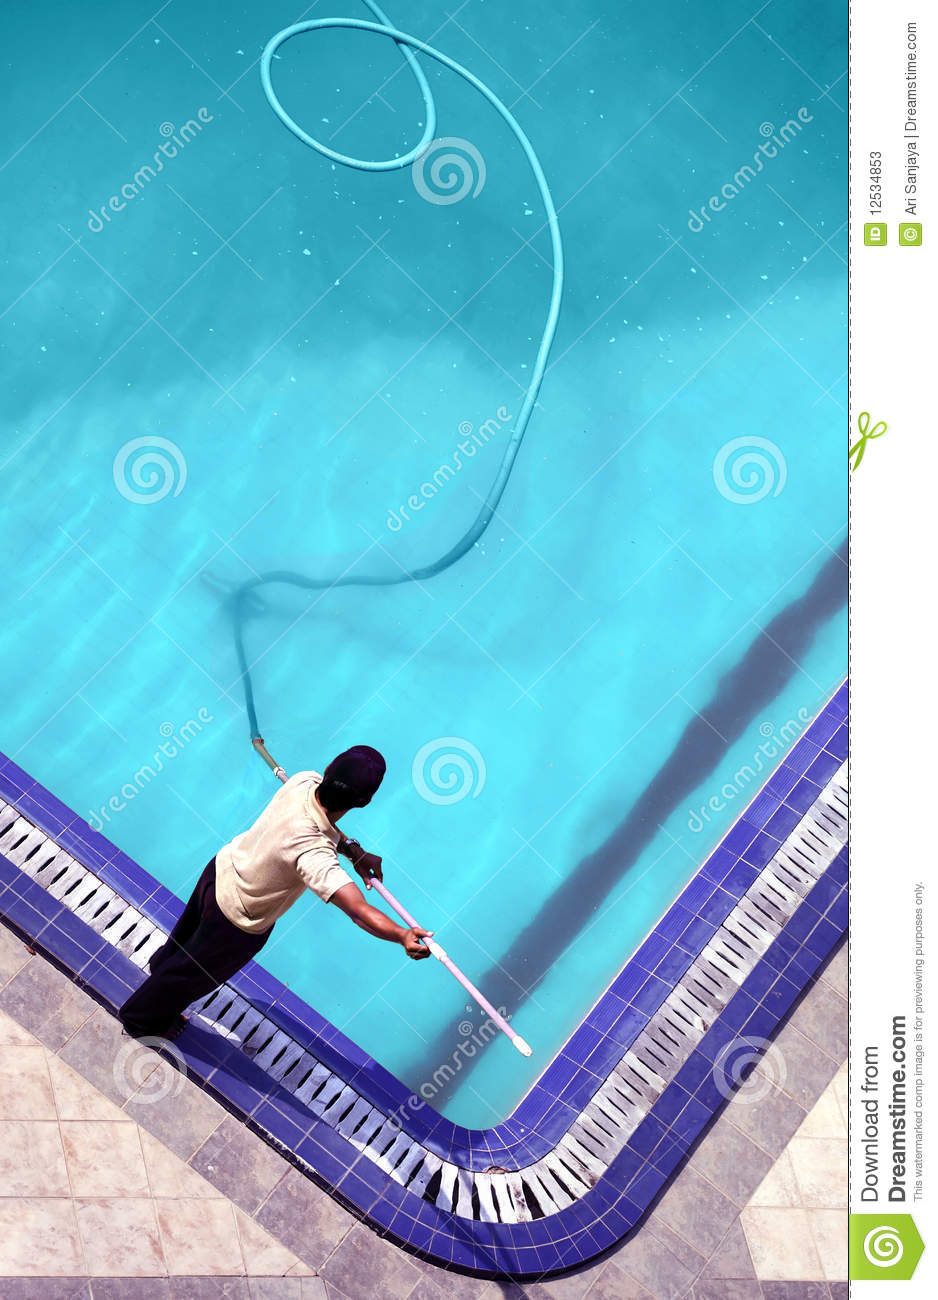 Pool Cleaning Stock Photos   Image  12534853